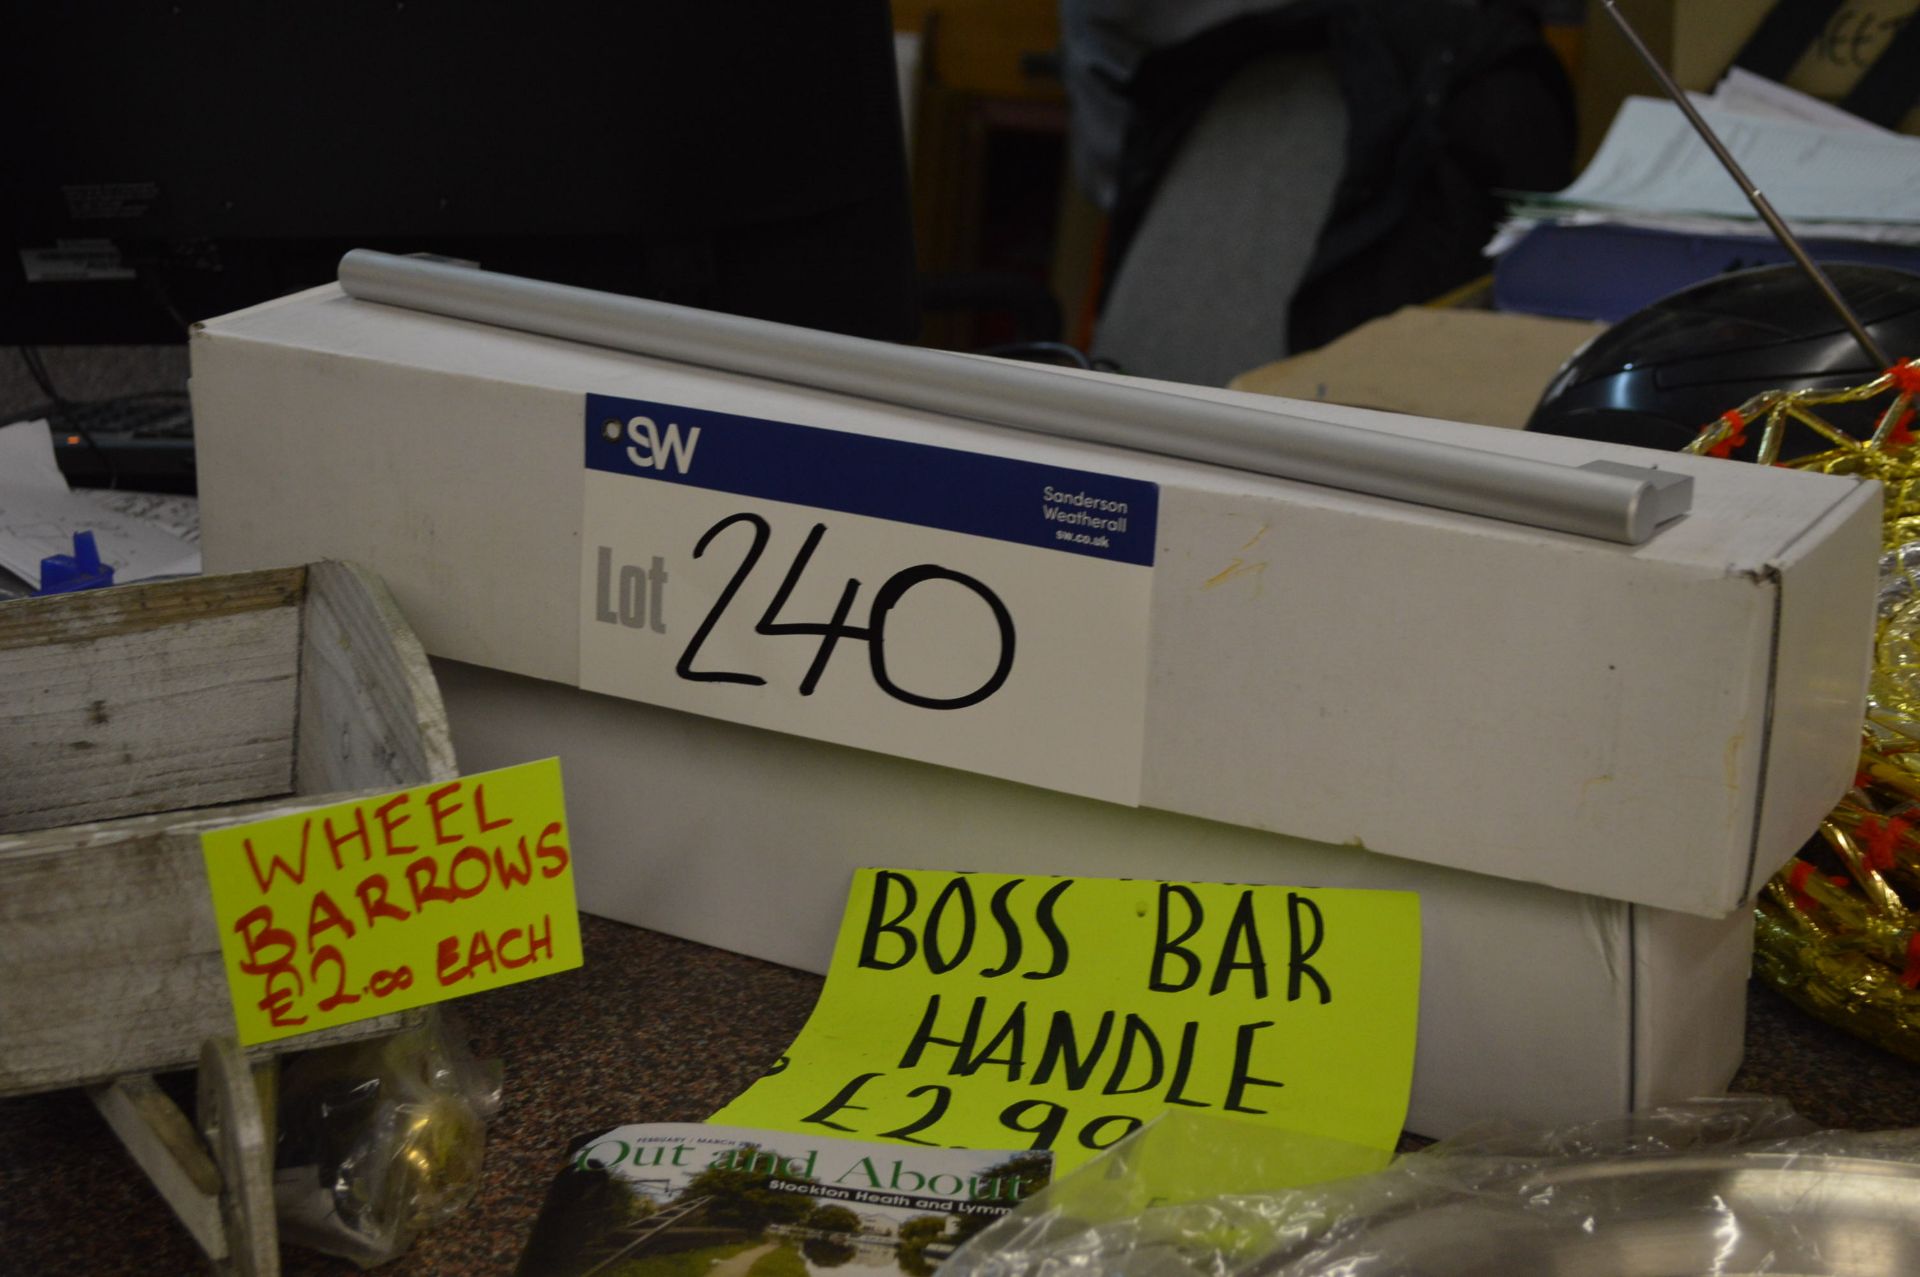 Boss Bar Handles, in two boxes